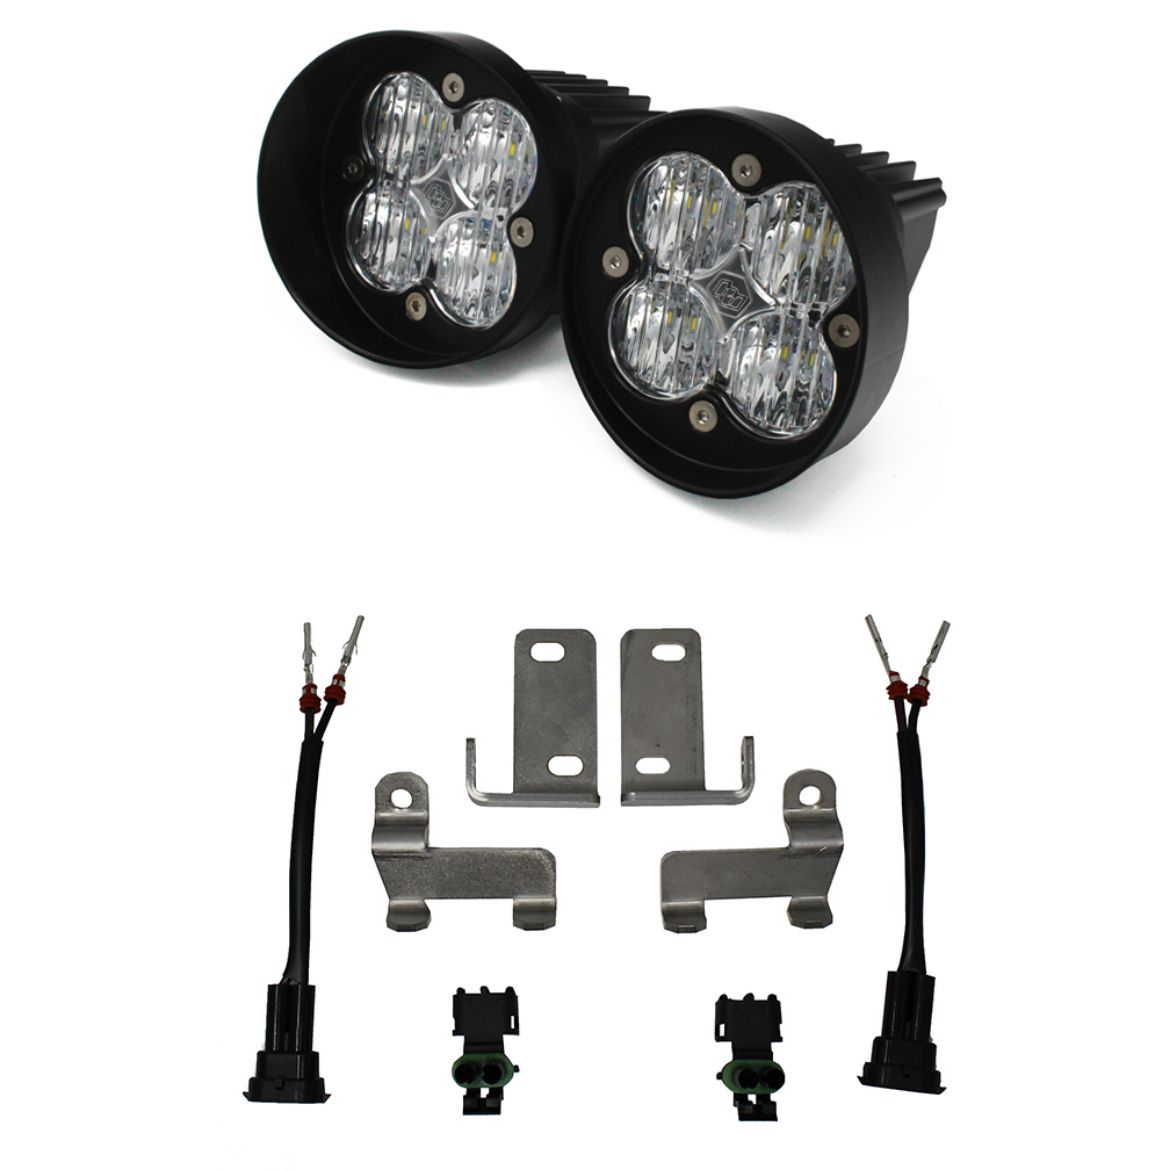 Picture of Toyota LED Light Kit Clear Lens Tacoma/Tundra/4Runner Squadron Sport WC Baja Designs